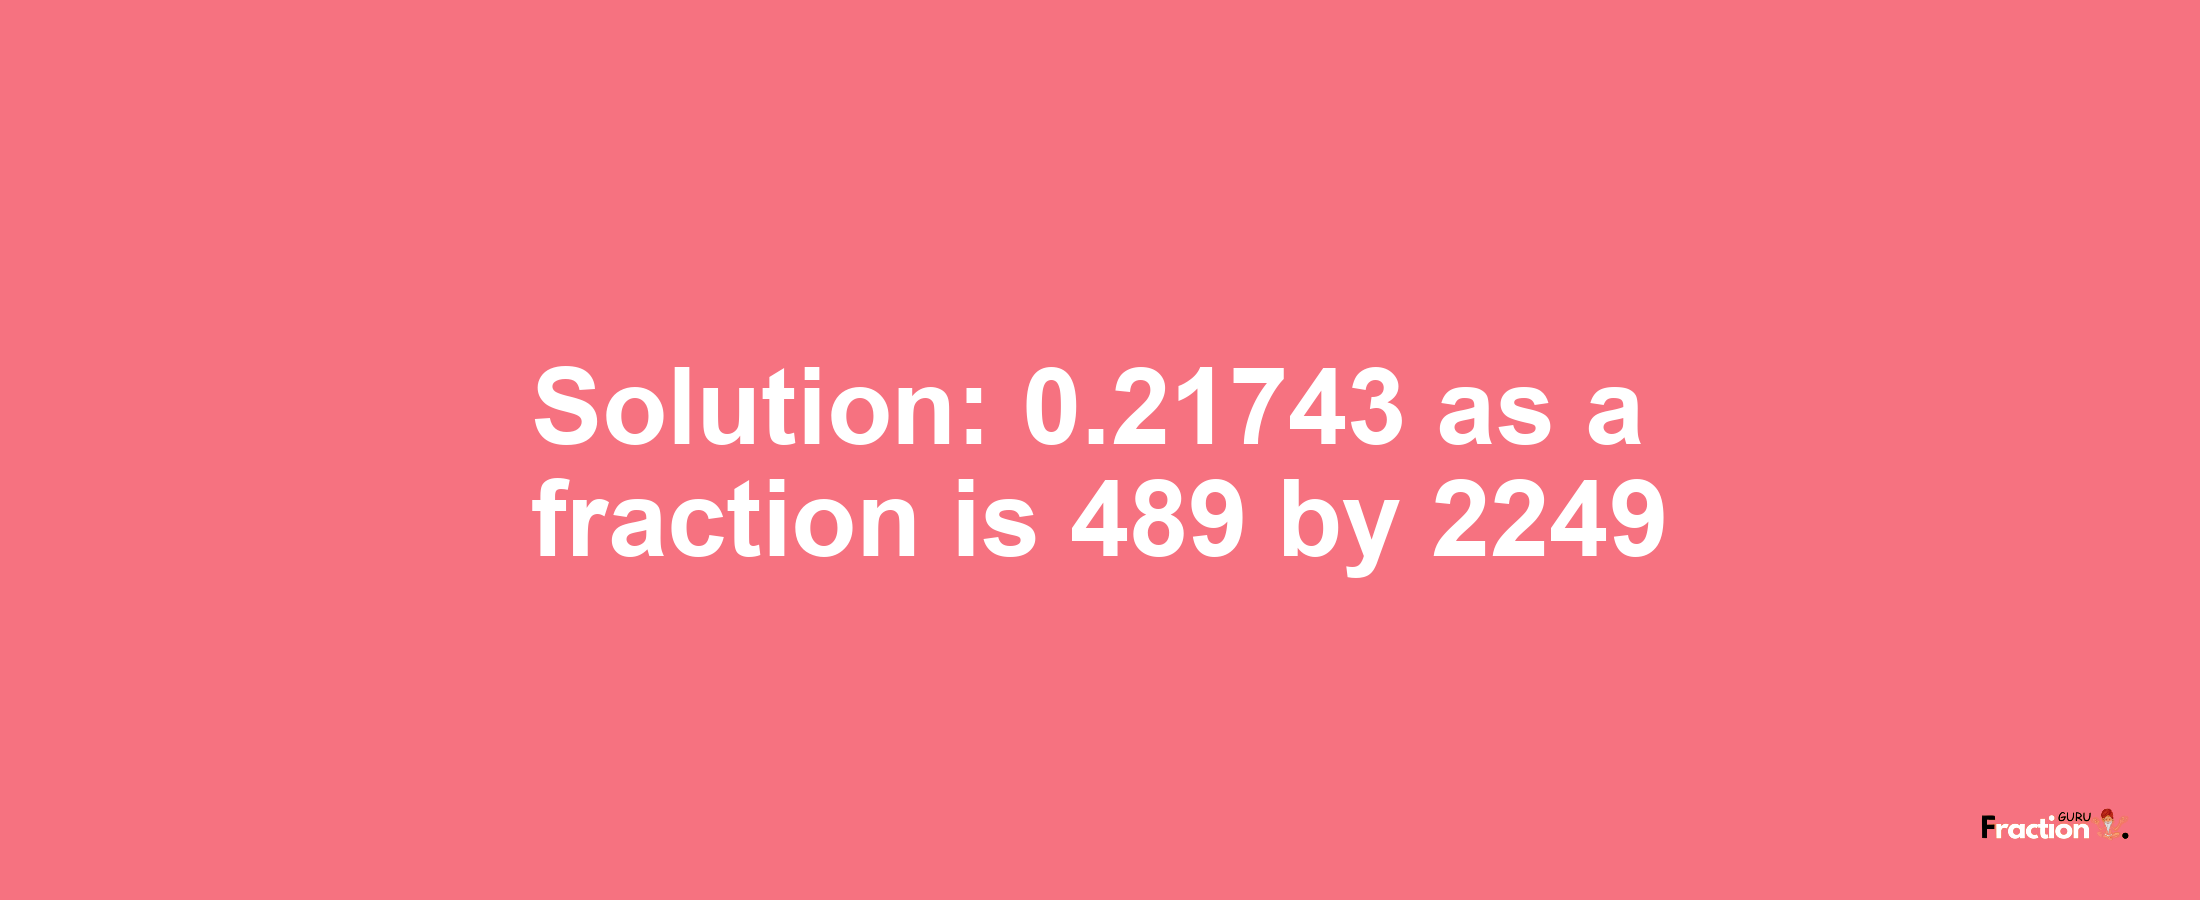 Solution:0.21743 as a fraction is 489/2249